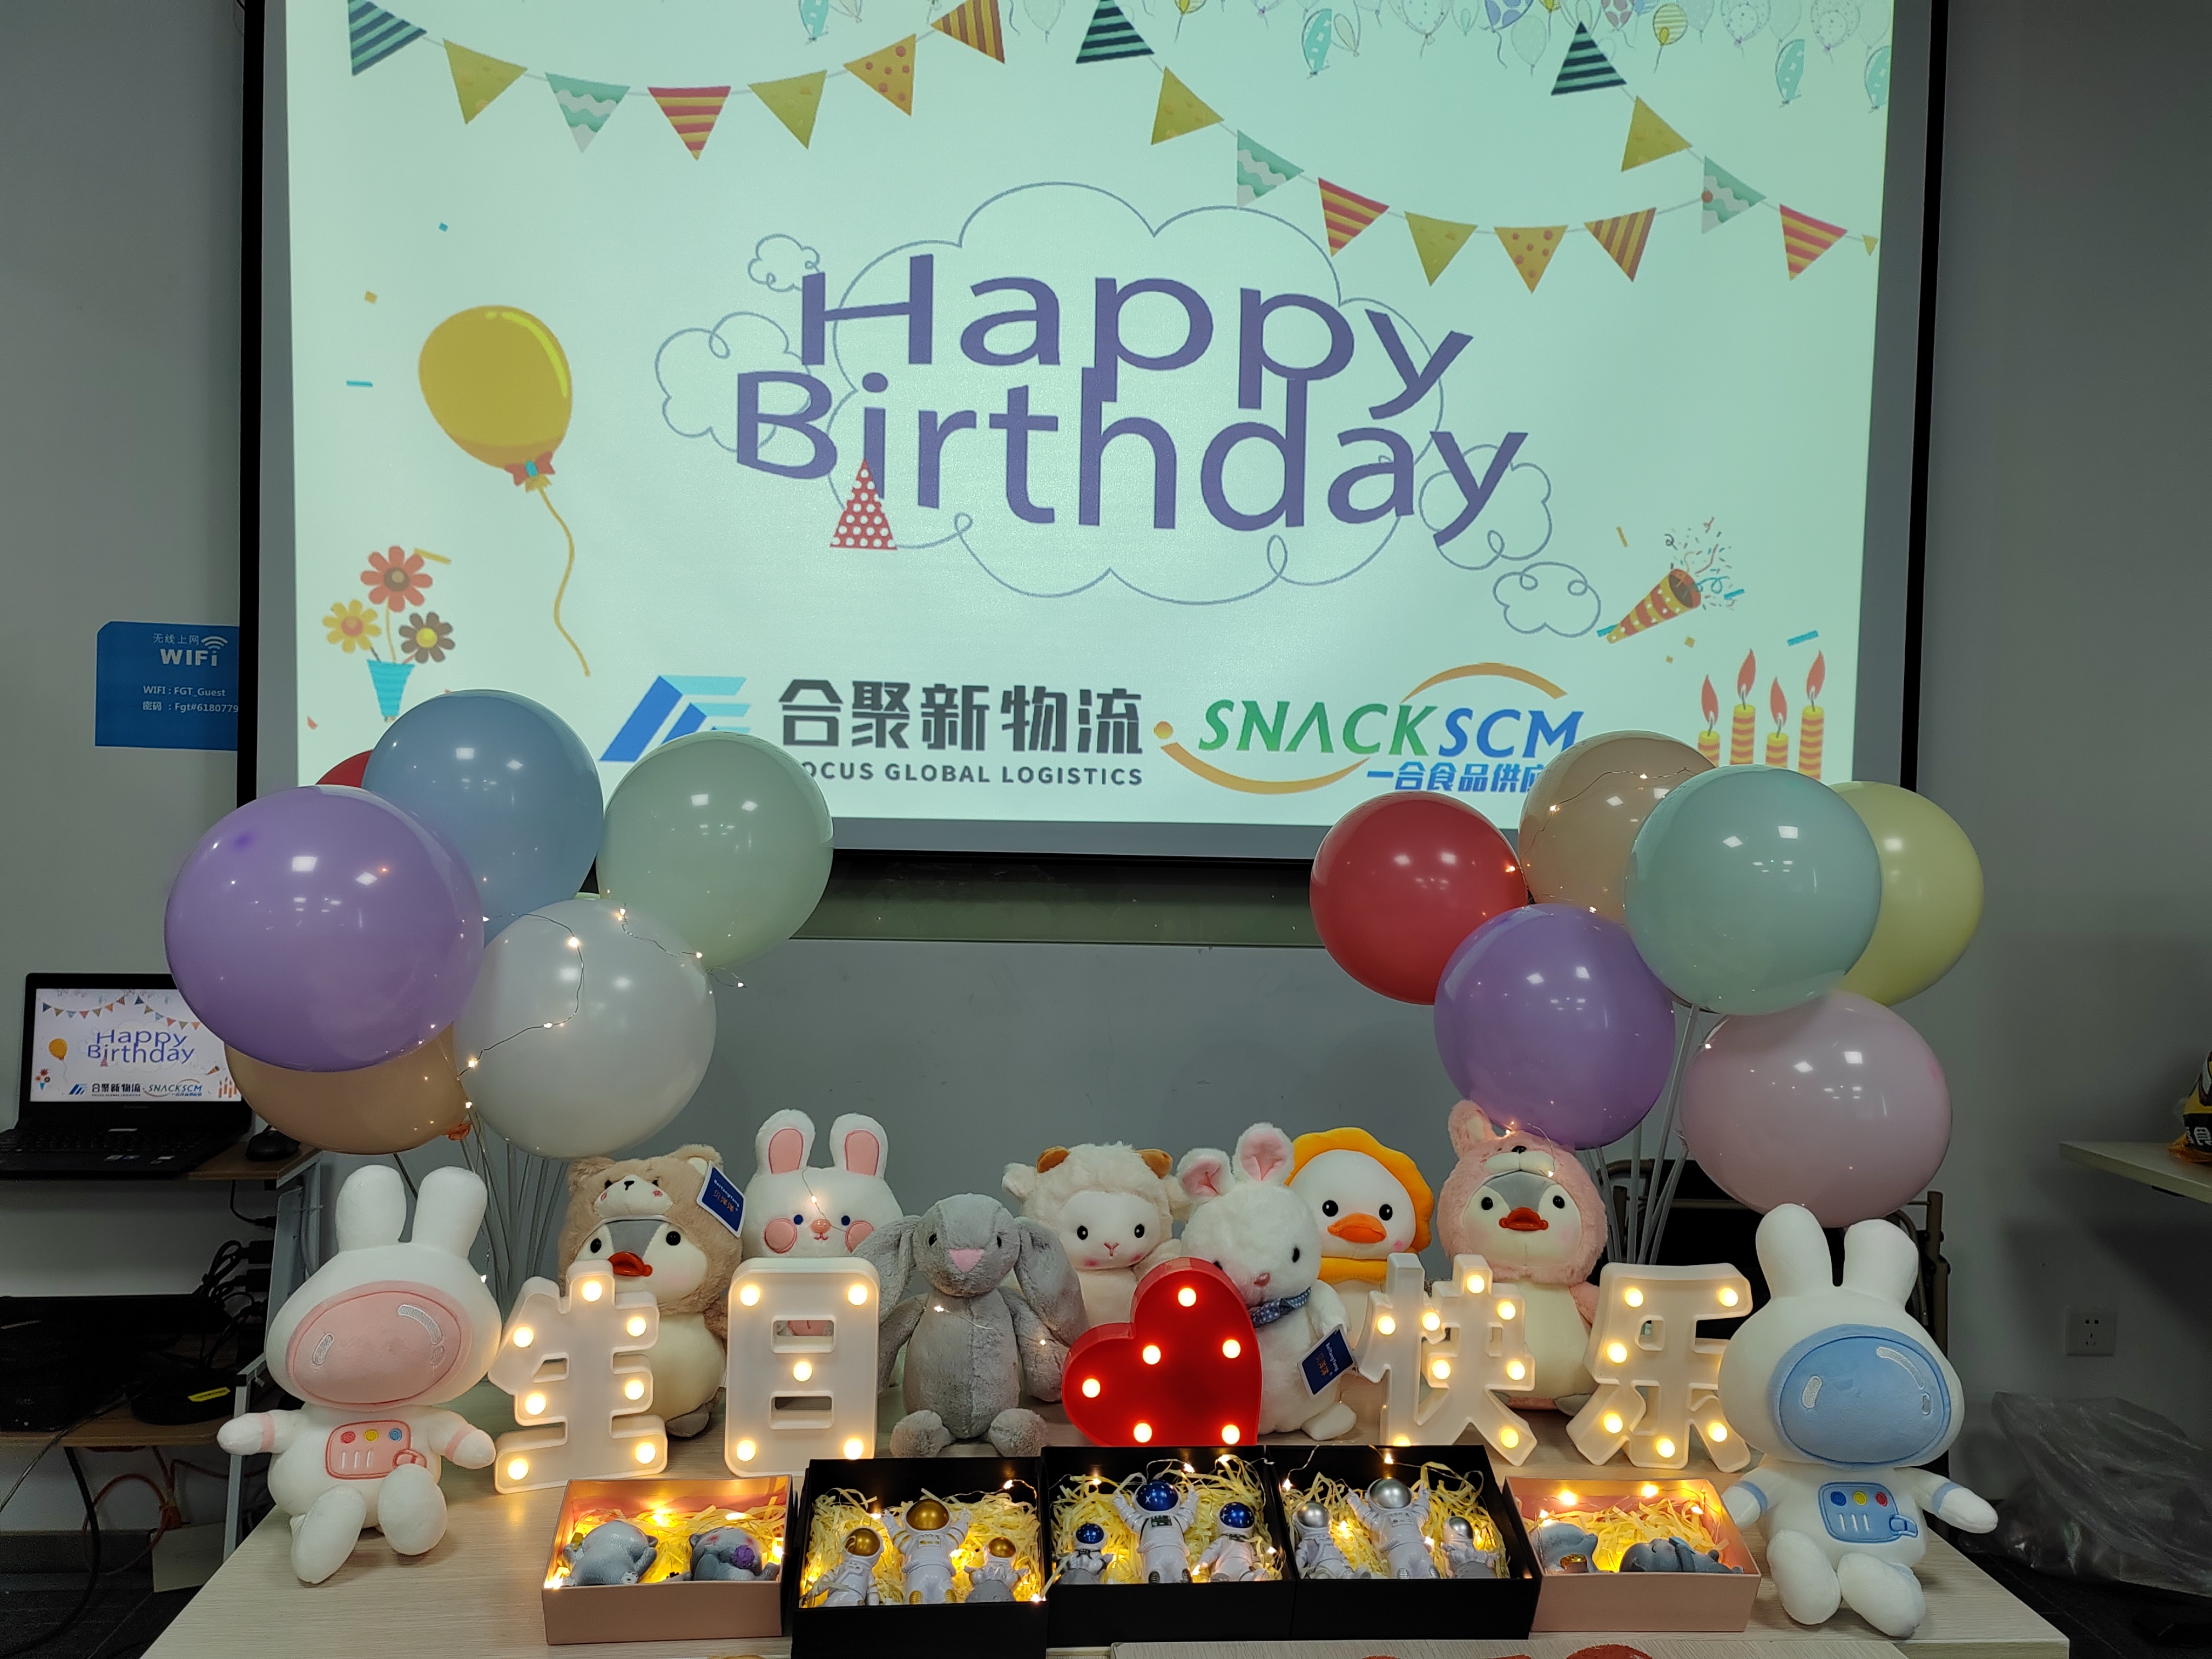 Birthday Party | The birthday party of Focus Global Logistics Co., Ltd. has been happily held in June!